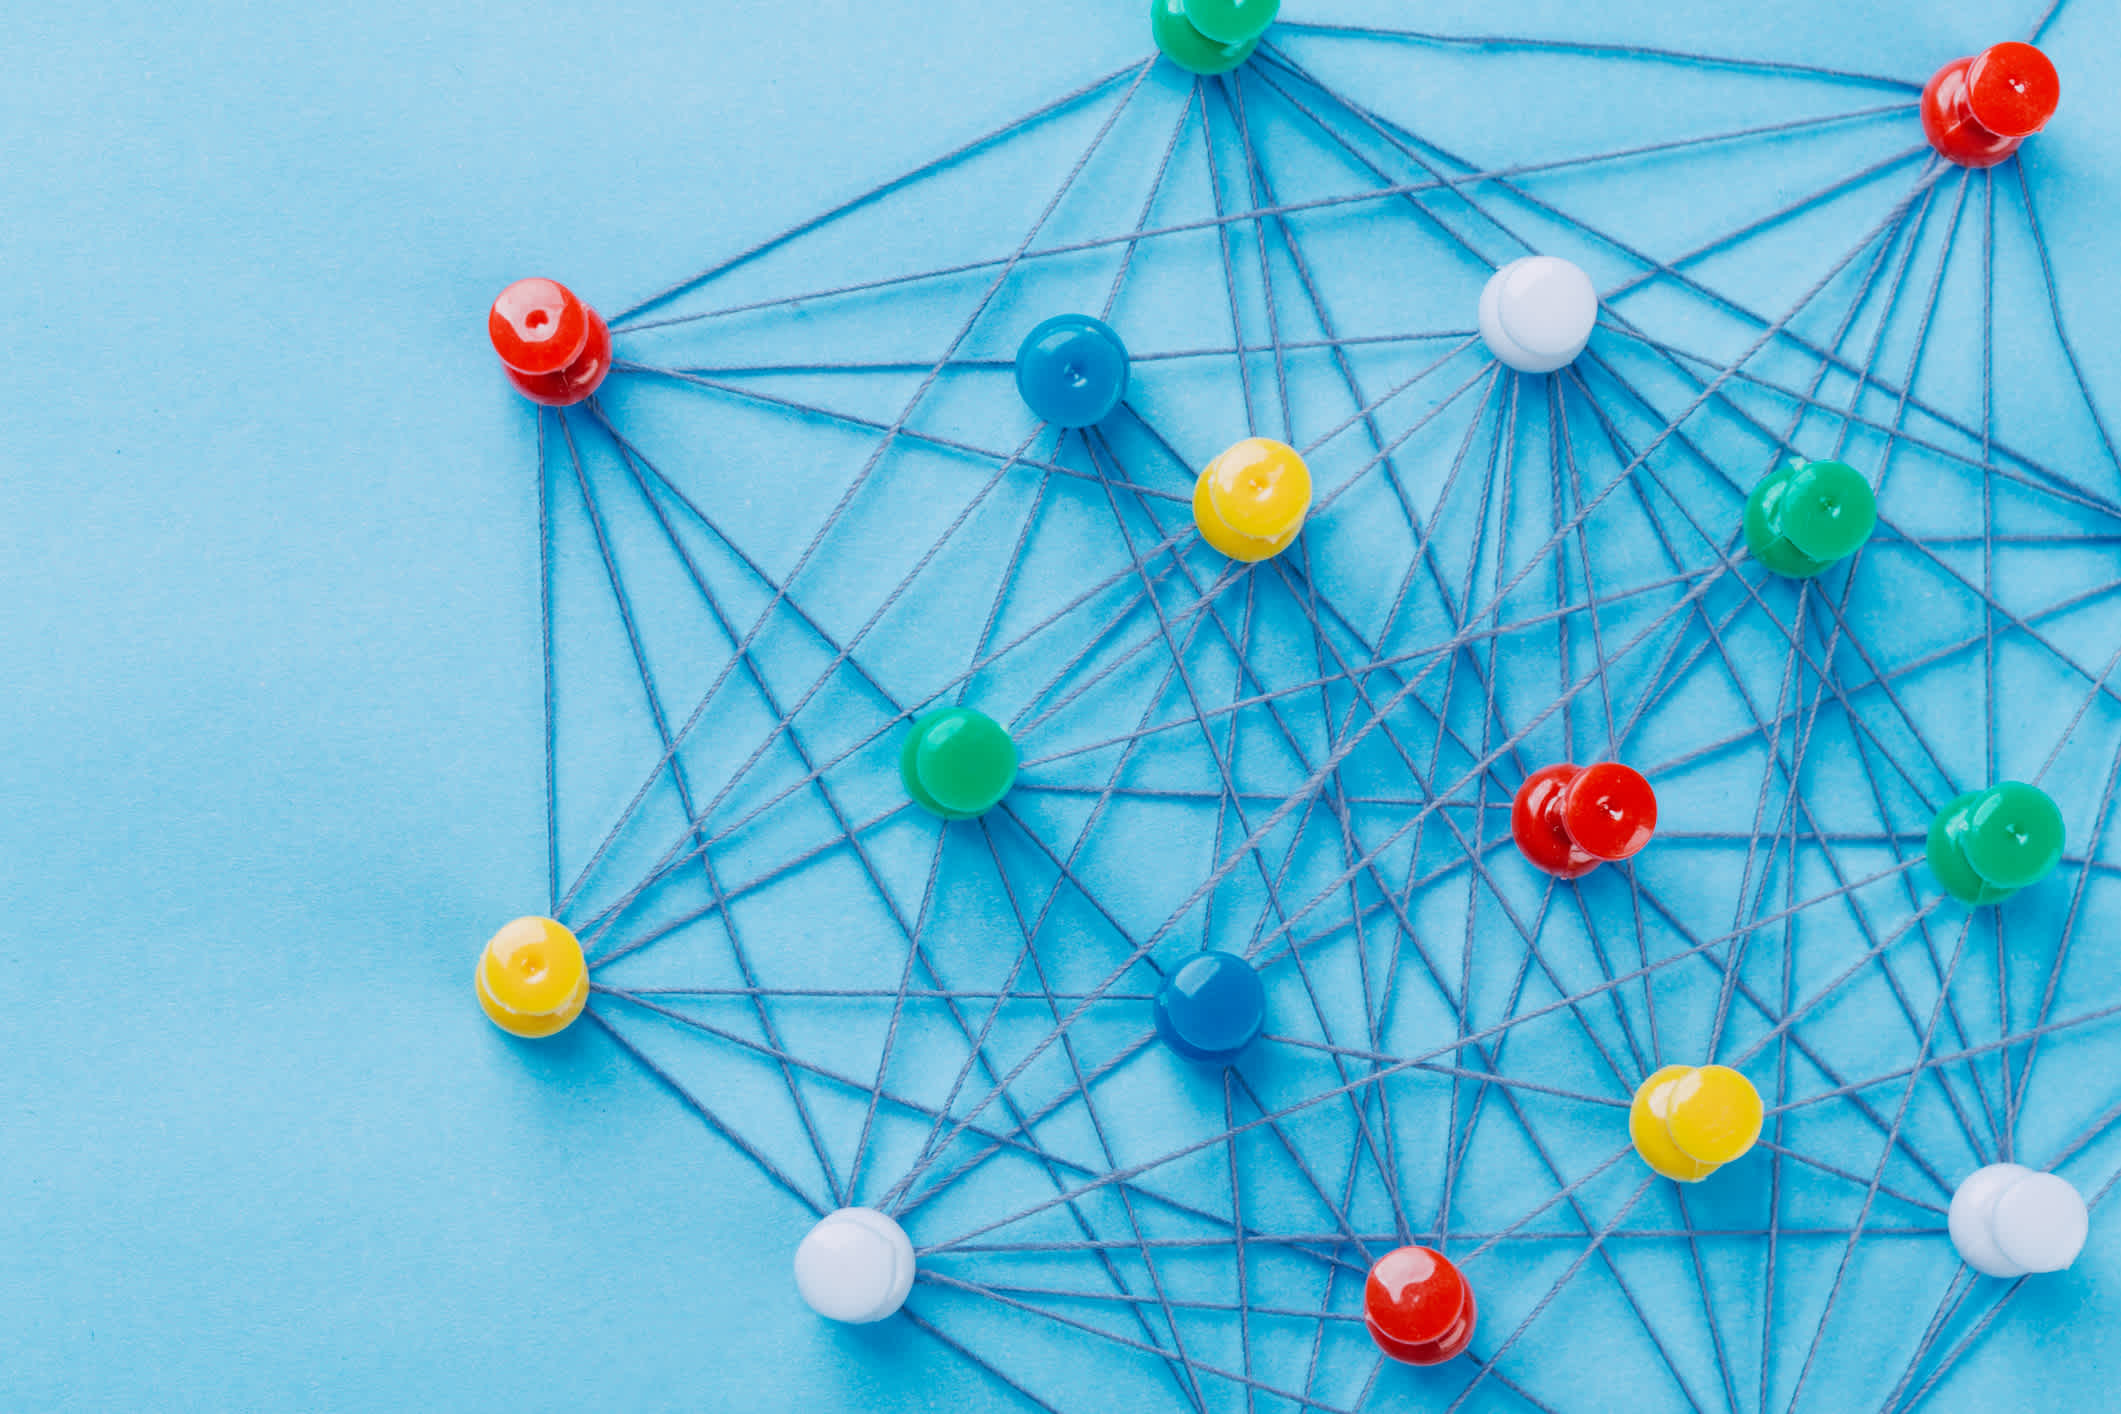 A small network of pins (Thumbtack)and string, An arrangement of colorful pins linked together with string on a pale blue background, suggests a network of connections. | Watermark